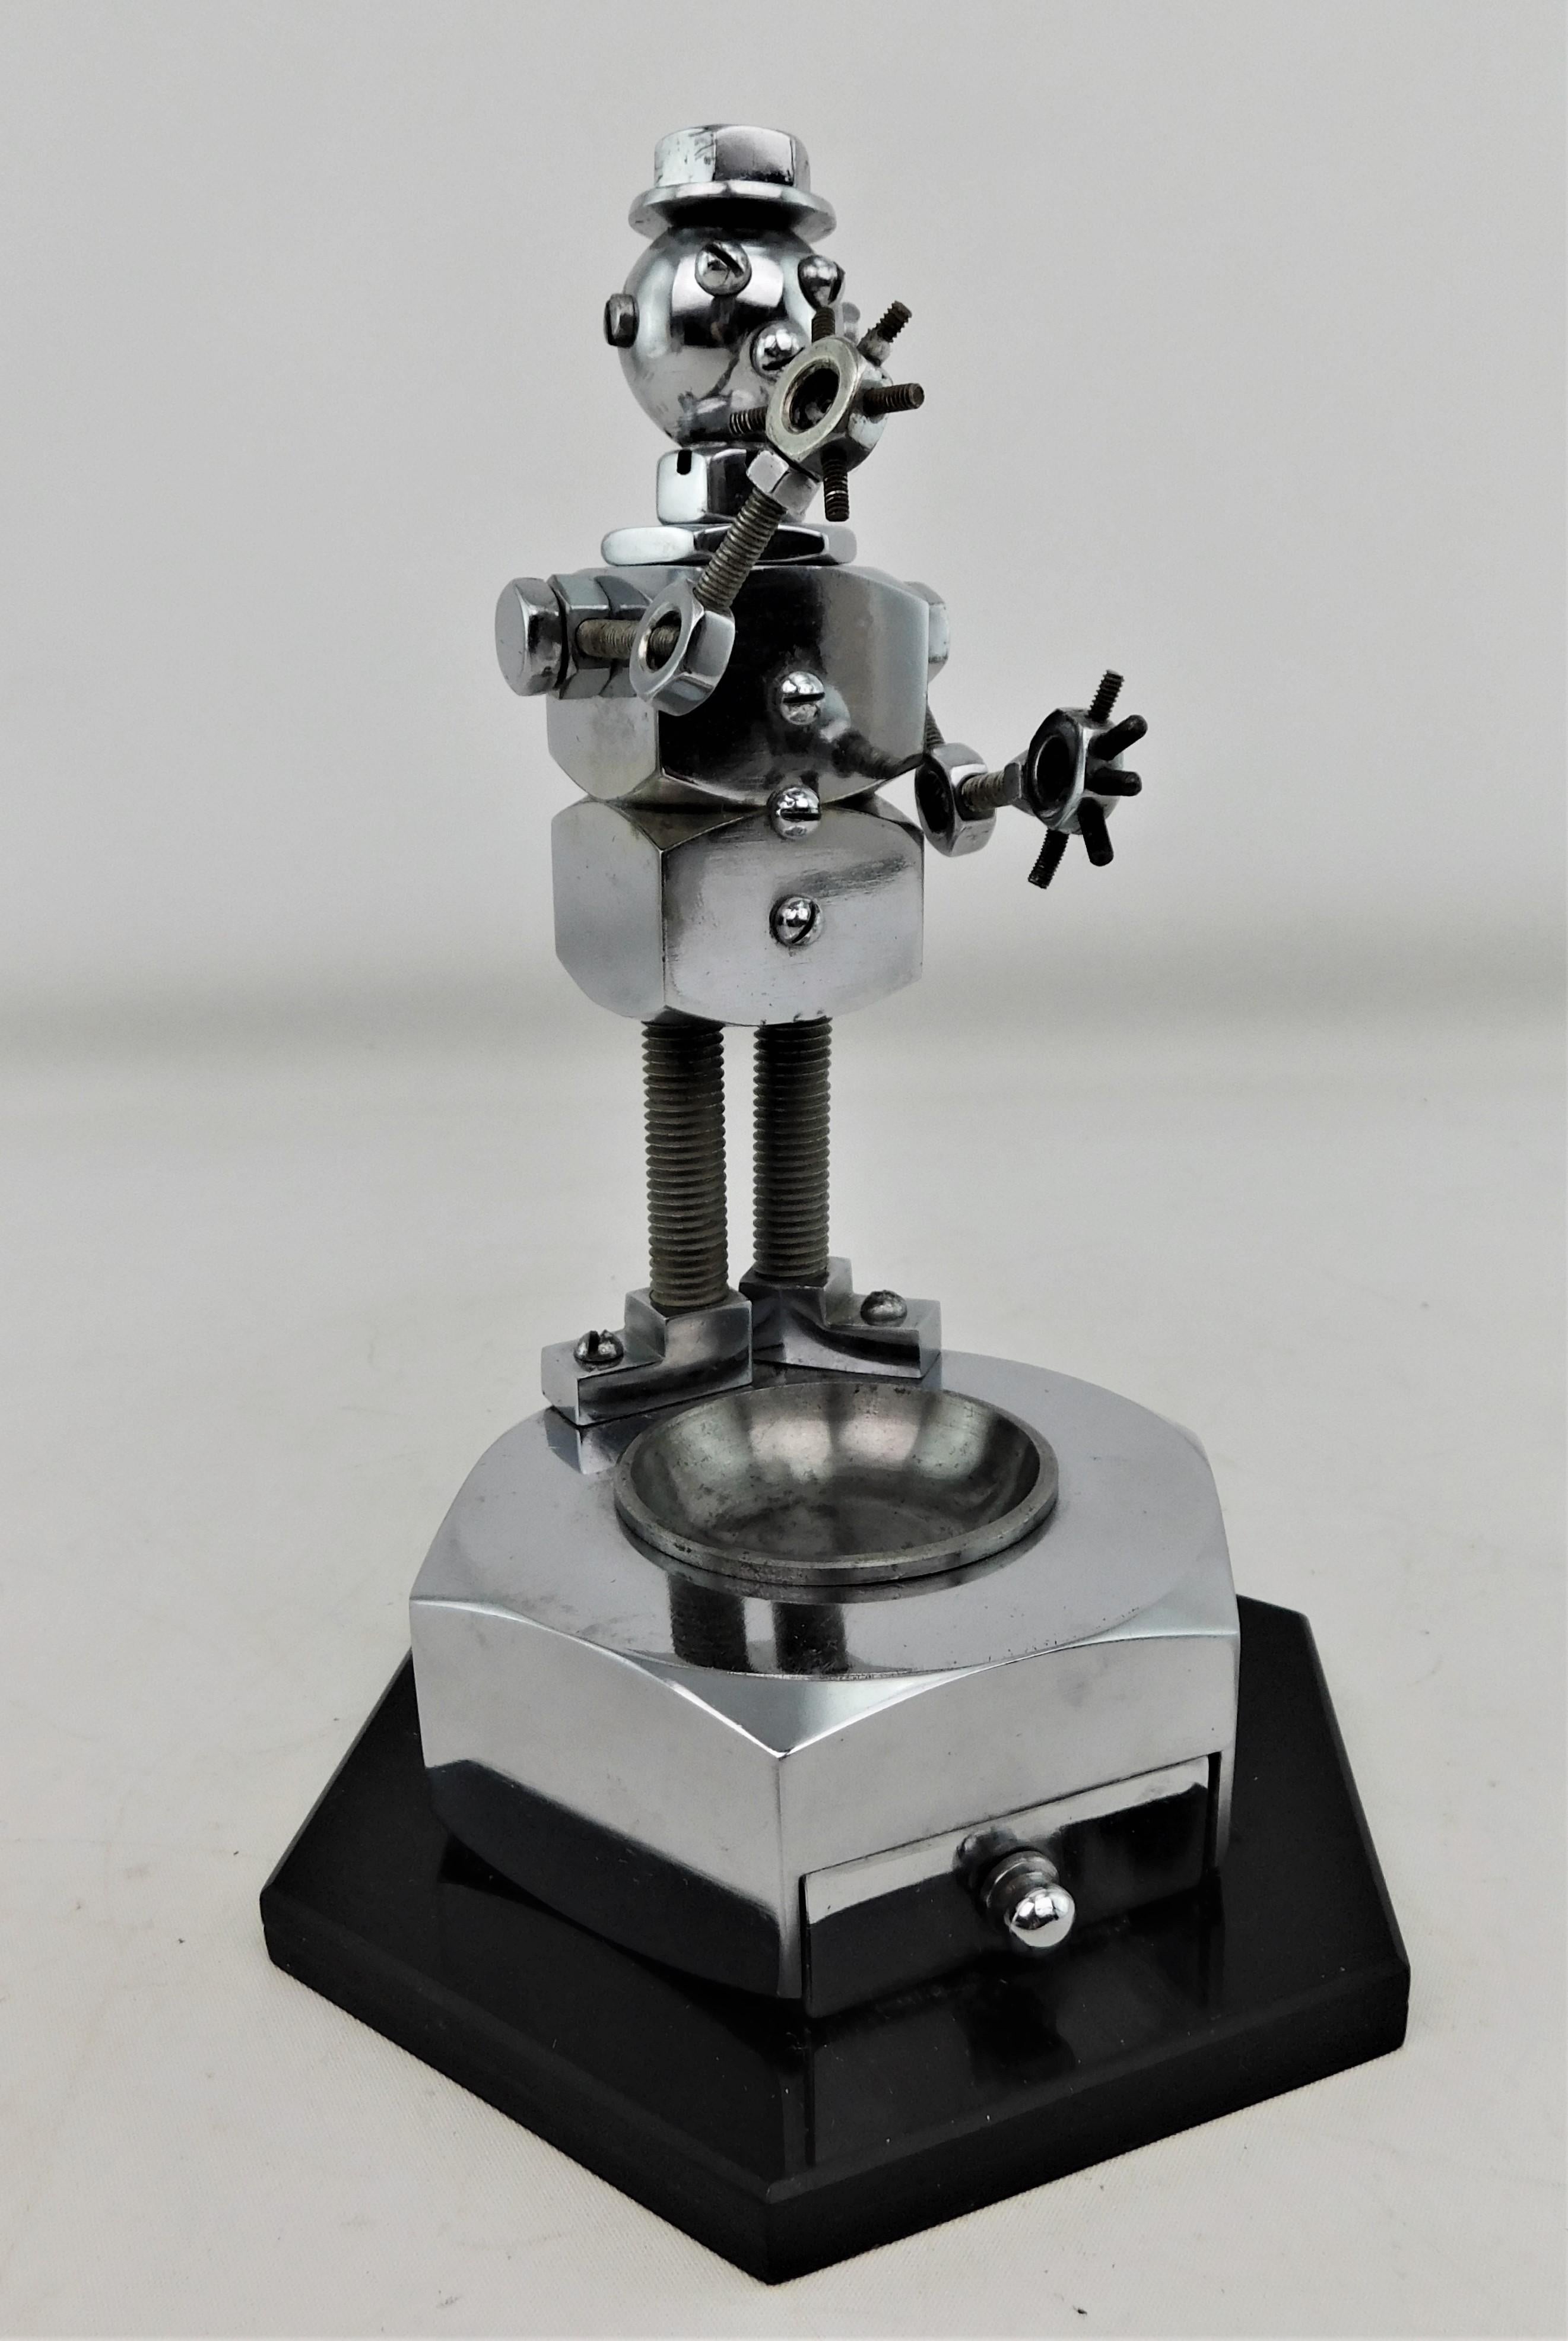 Vintage One of a kind 1950s handmade metal Robot ashtray with articulating arms, pullout drawer and ash tray that comes out to be cleaned. On a hard plastic acrylic five angled Pentagon base 6 inches round by 8.75 inches high.